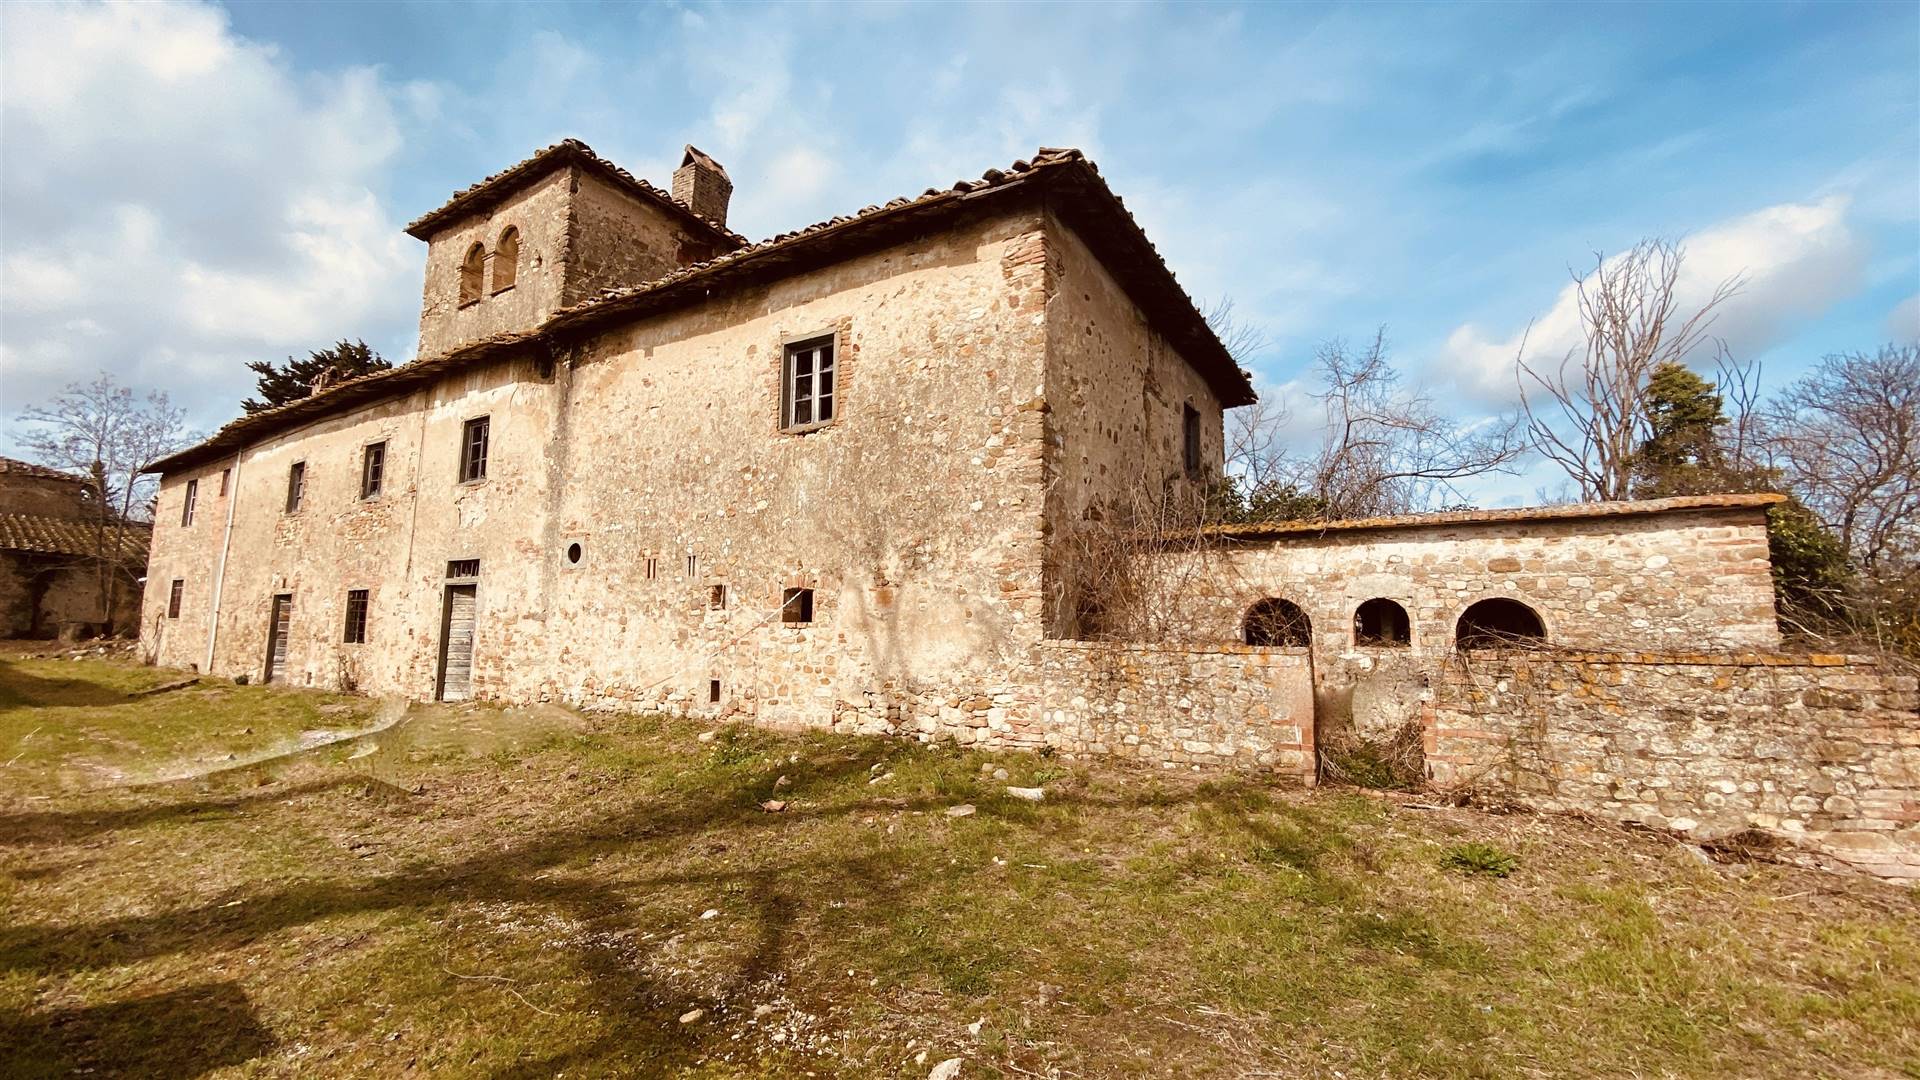 San Casciano in Val di Pesa, for sale farmhouse forming part of a small hamlet nestled in the green countryside , overlooking the panorama of Val di 